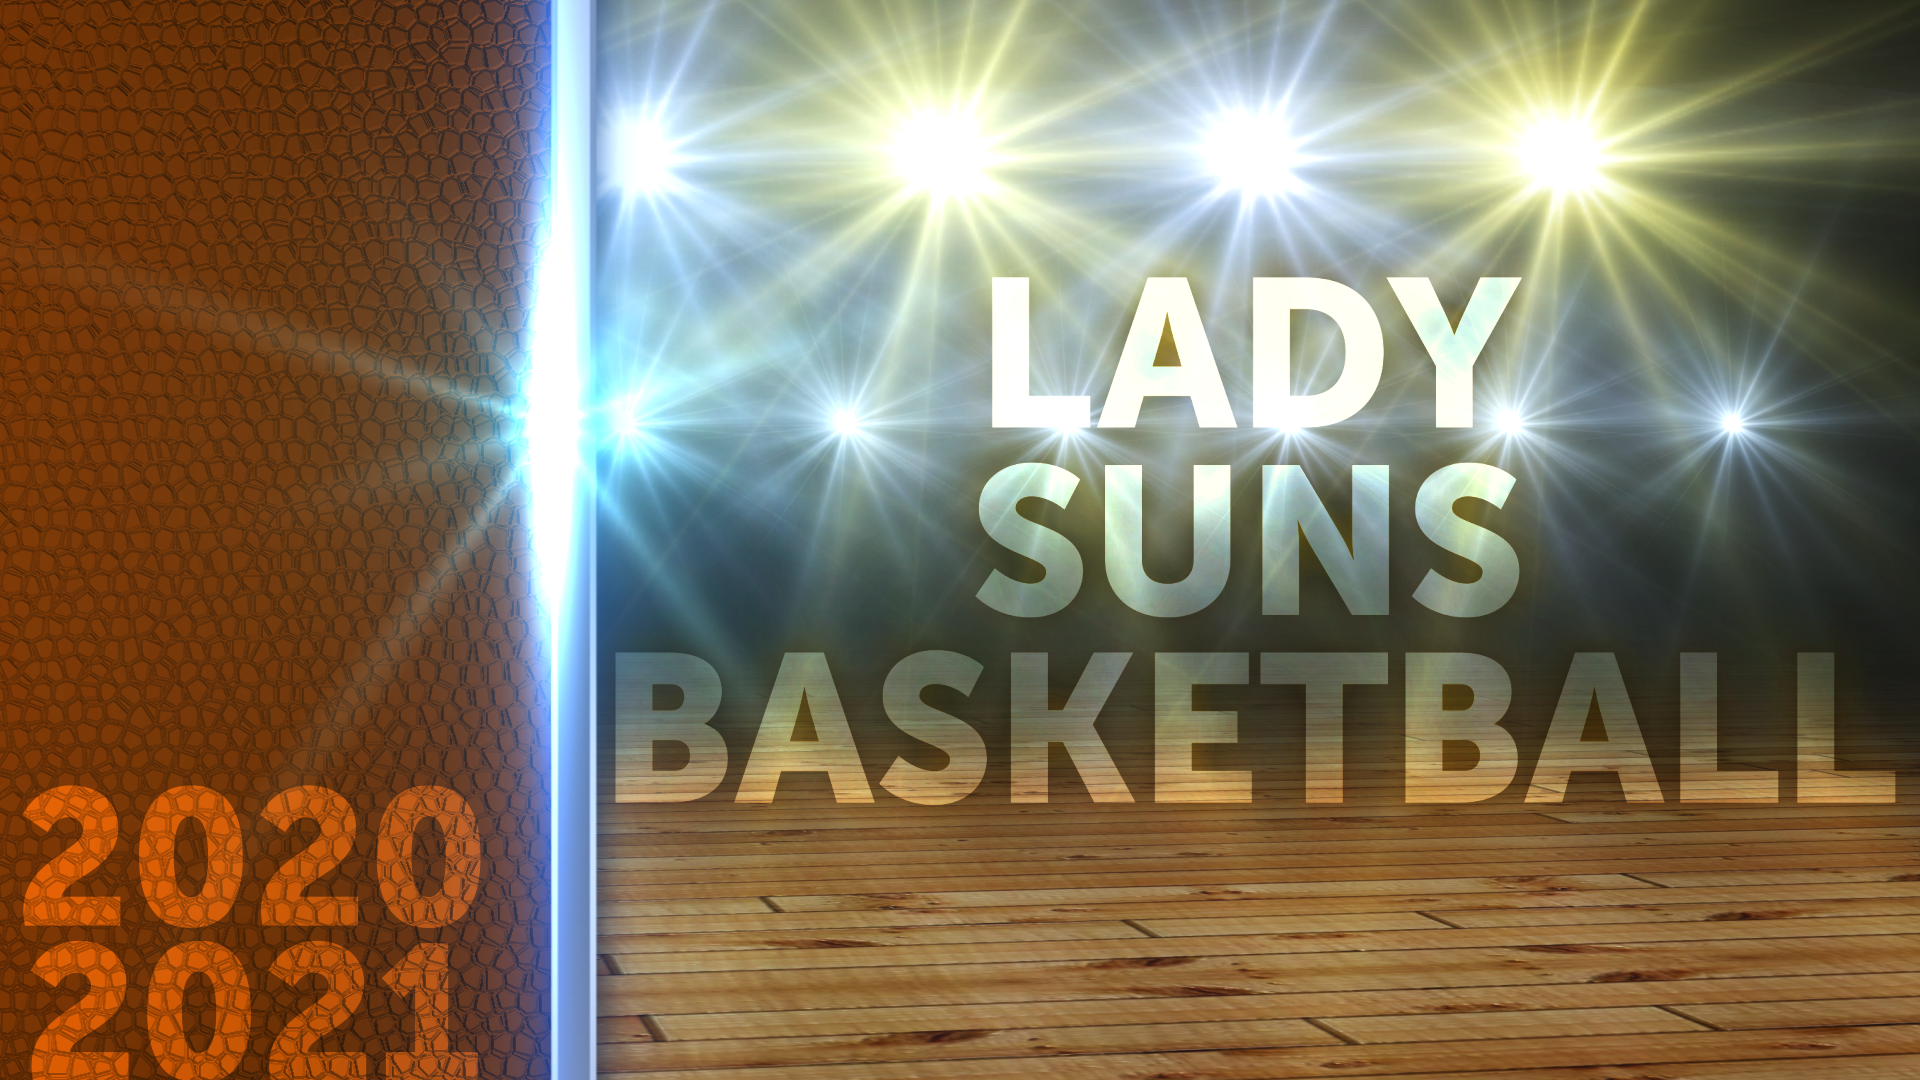 DELAYED...BUT NOT DETHRONED- LADY SUNS SEASON 20/21